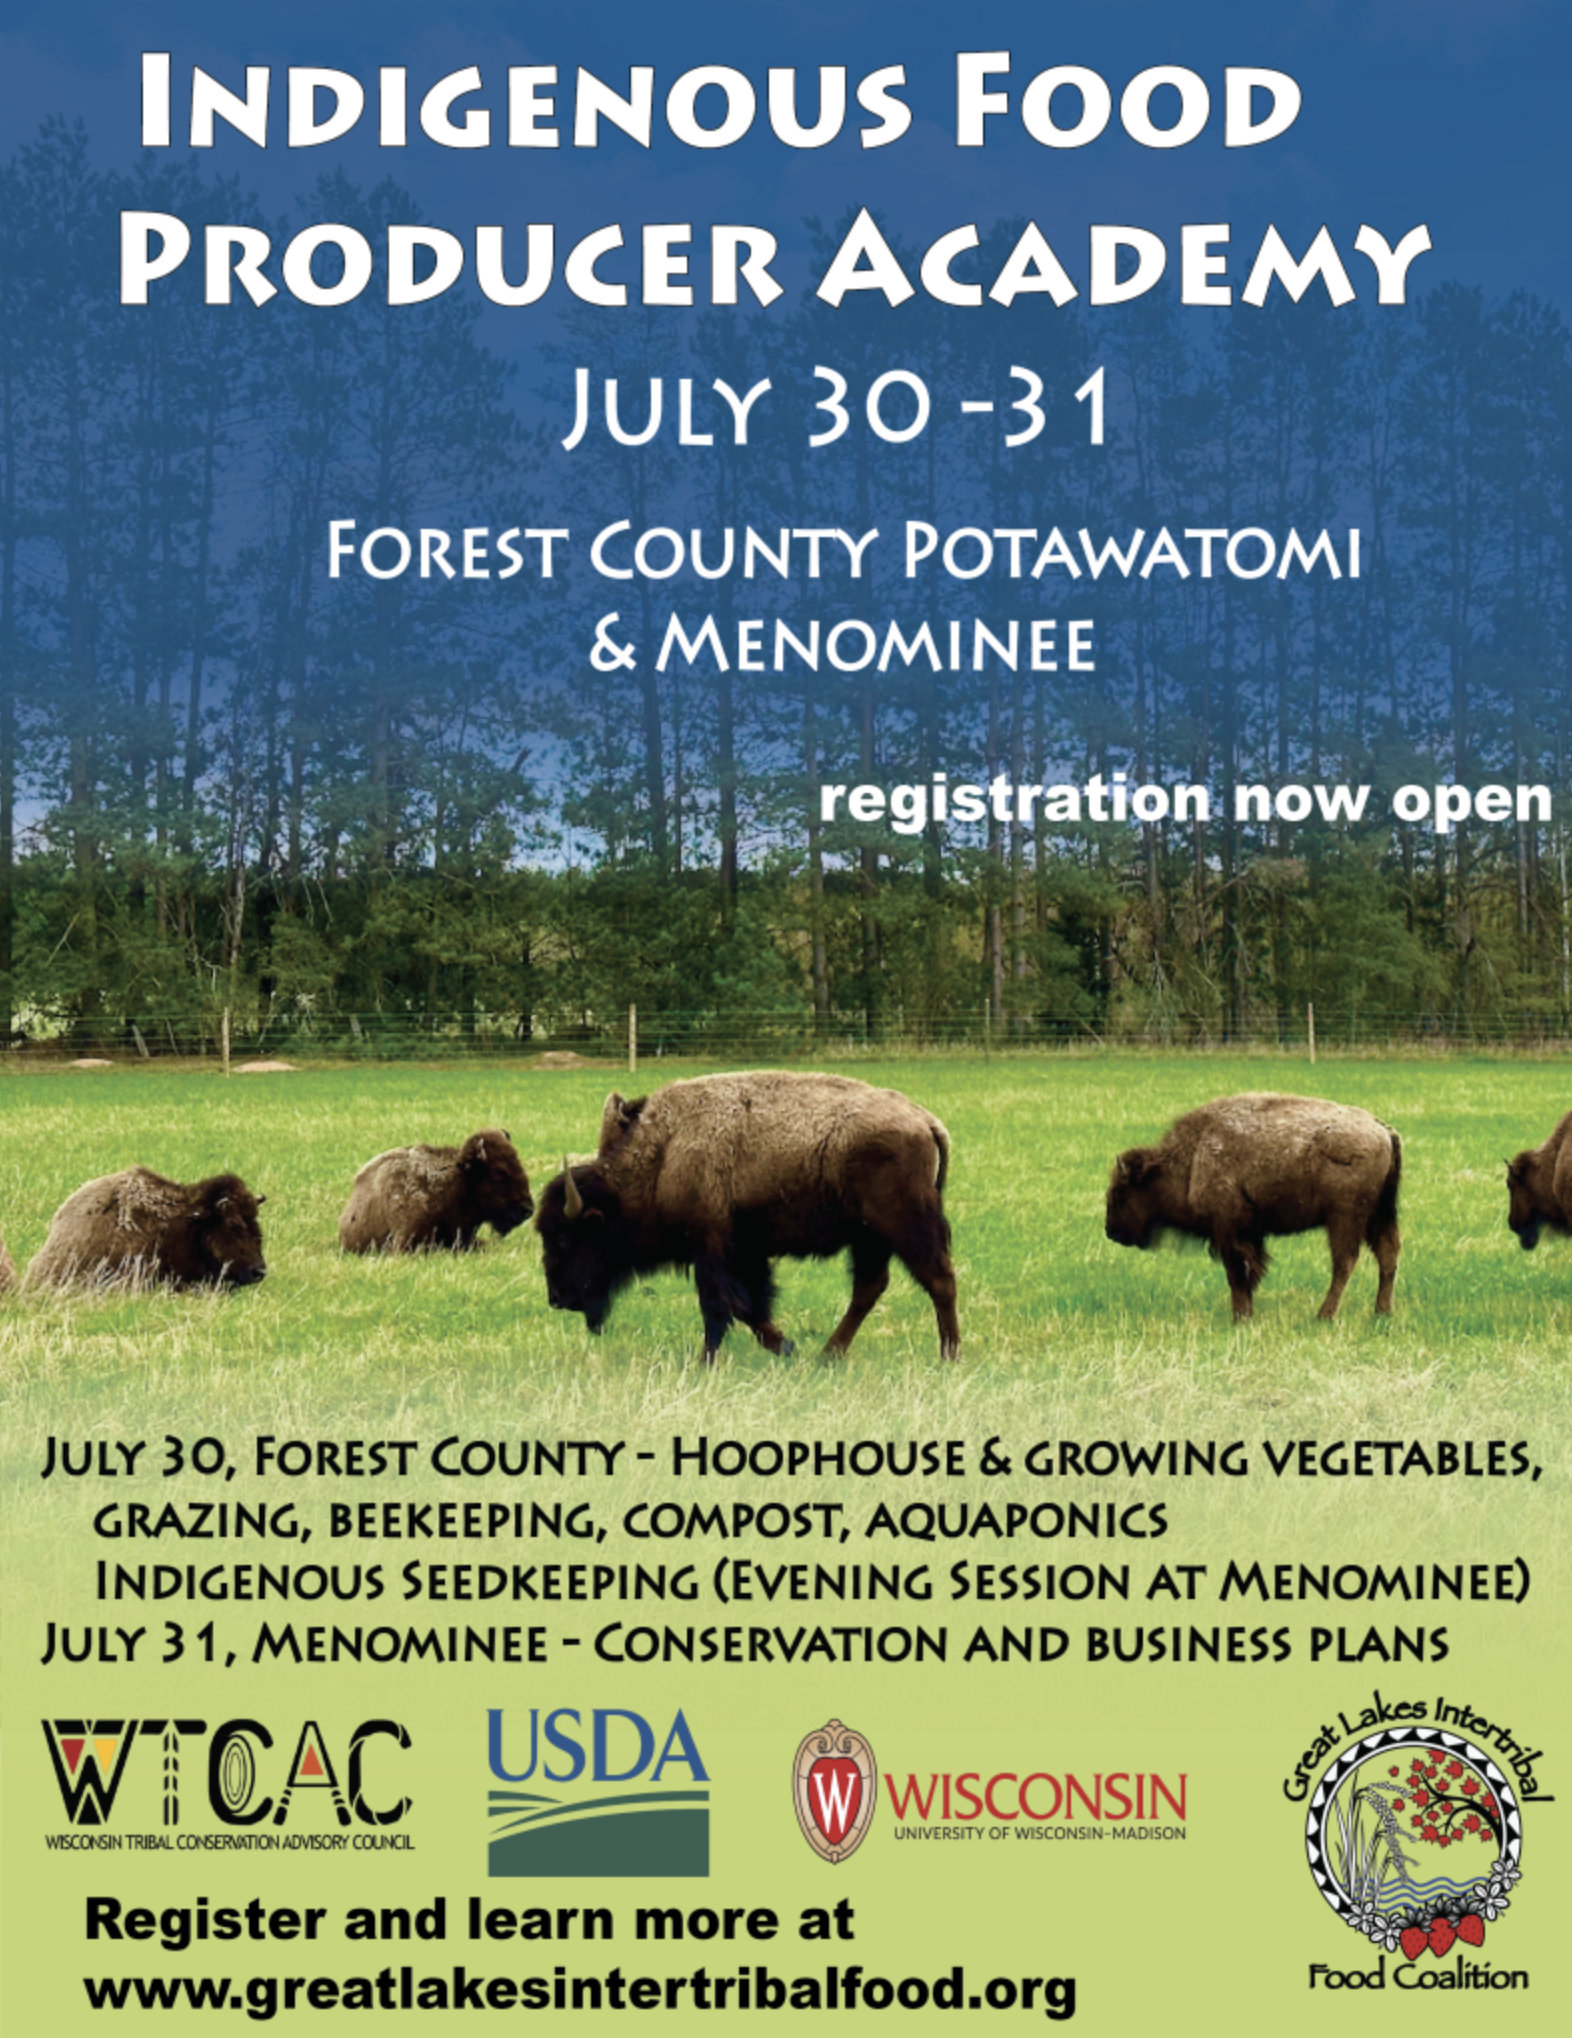 Indigenous Producer Academy July 30-31